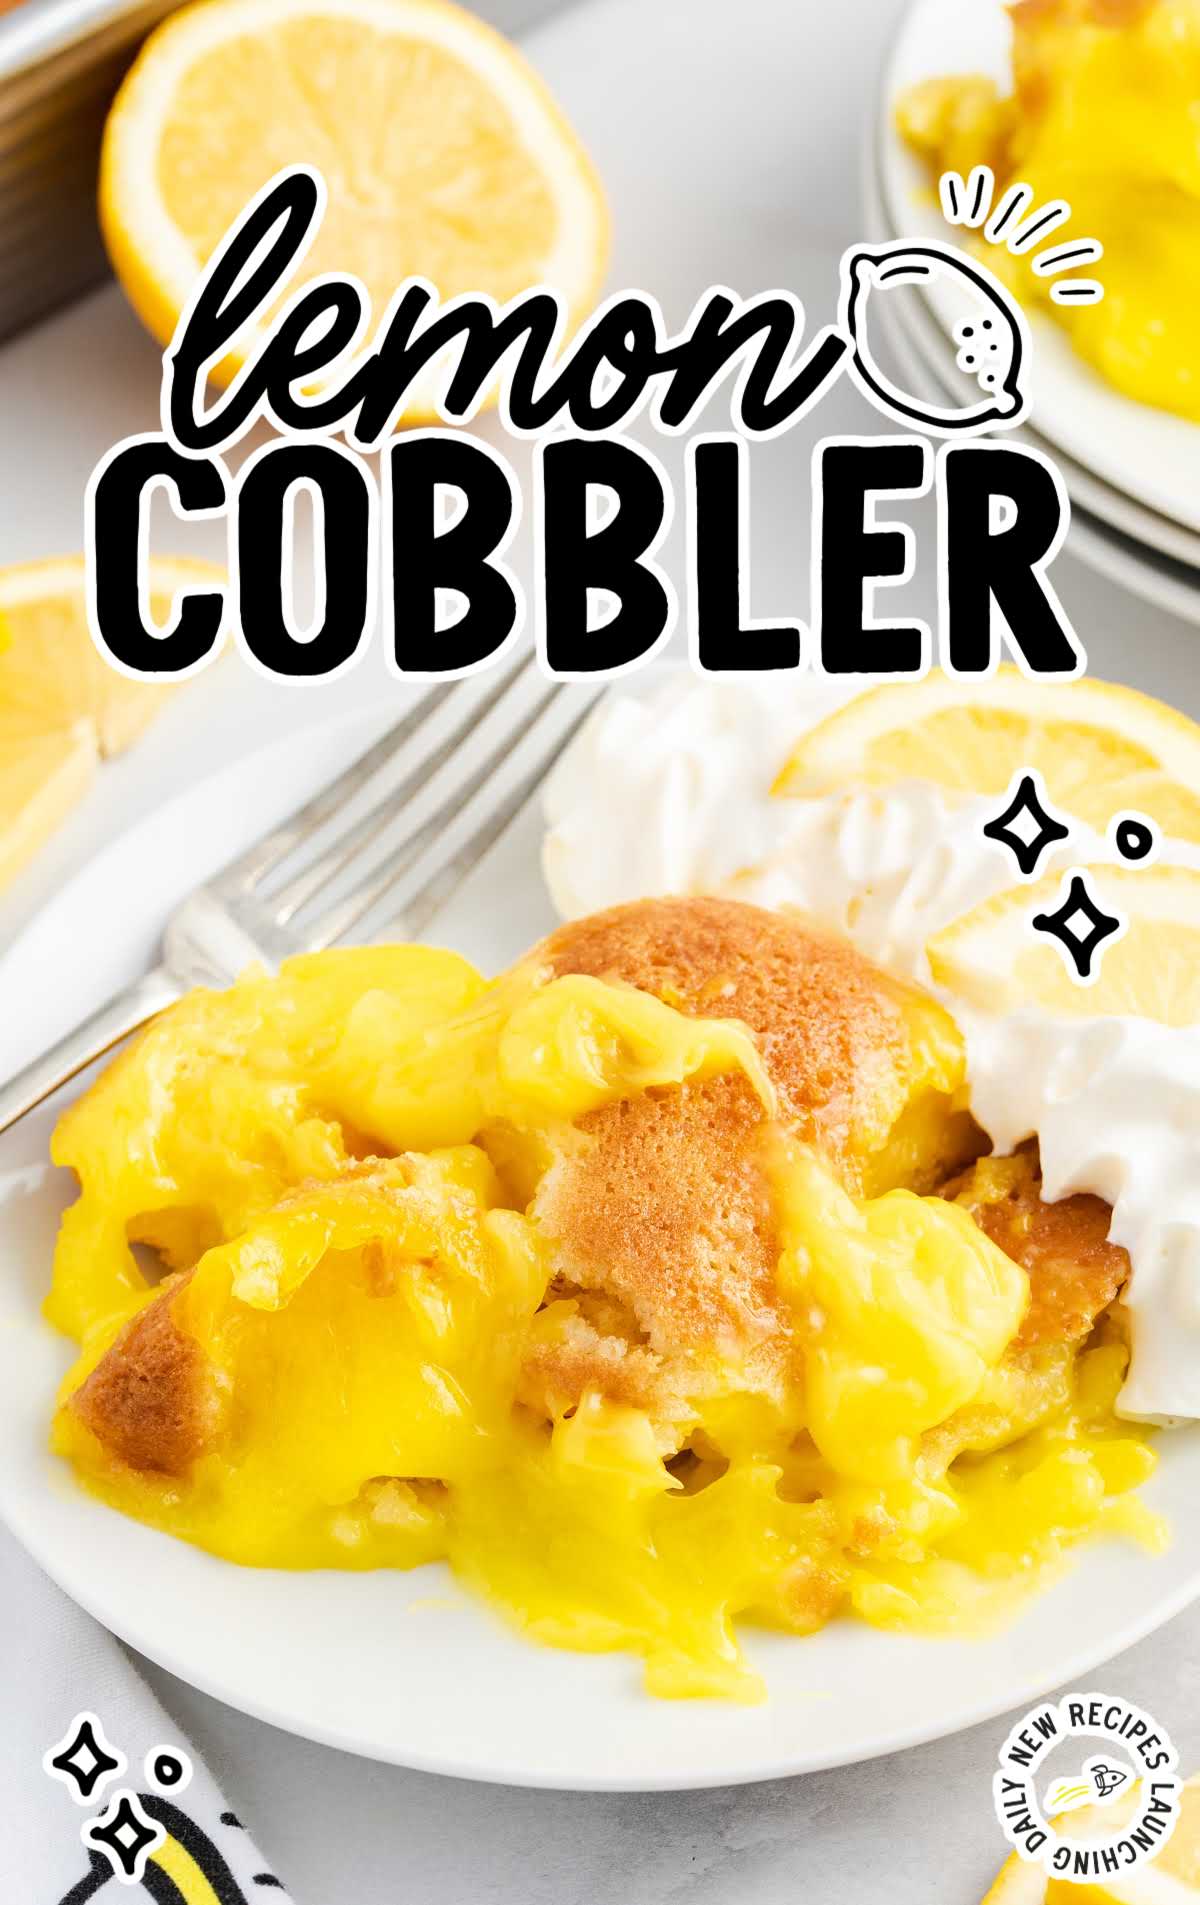 a piece of Lemon Cobbler on a plate with ice cream and a fork